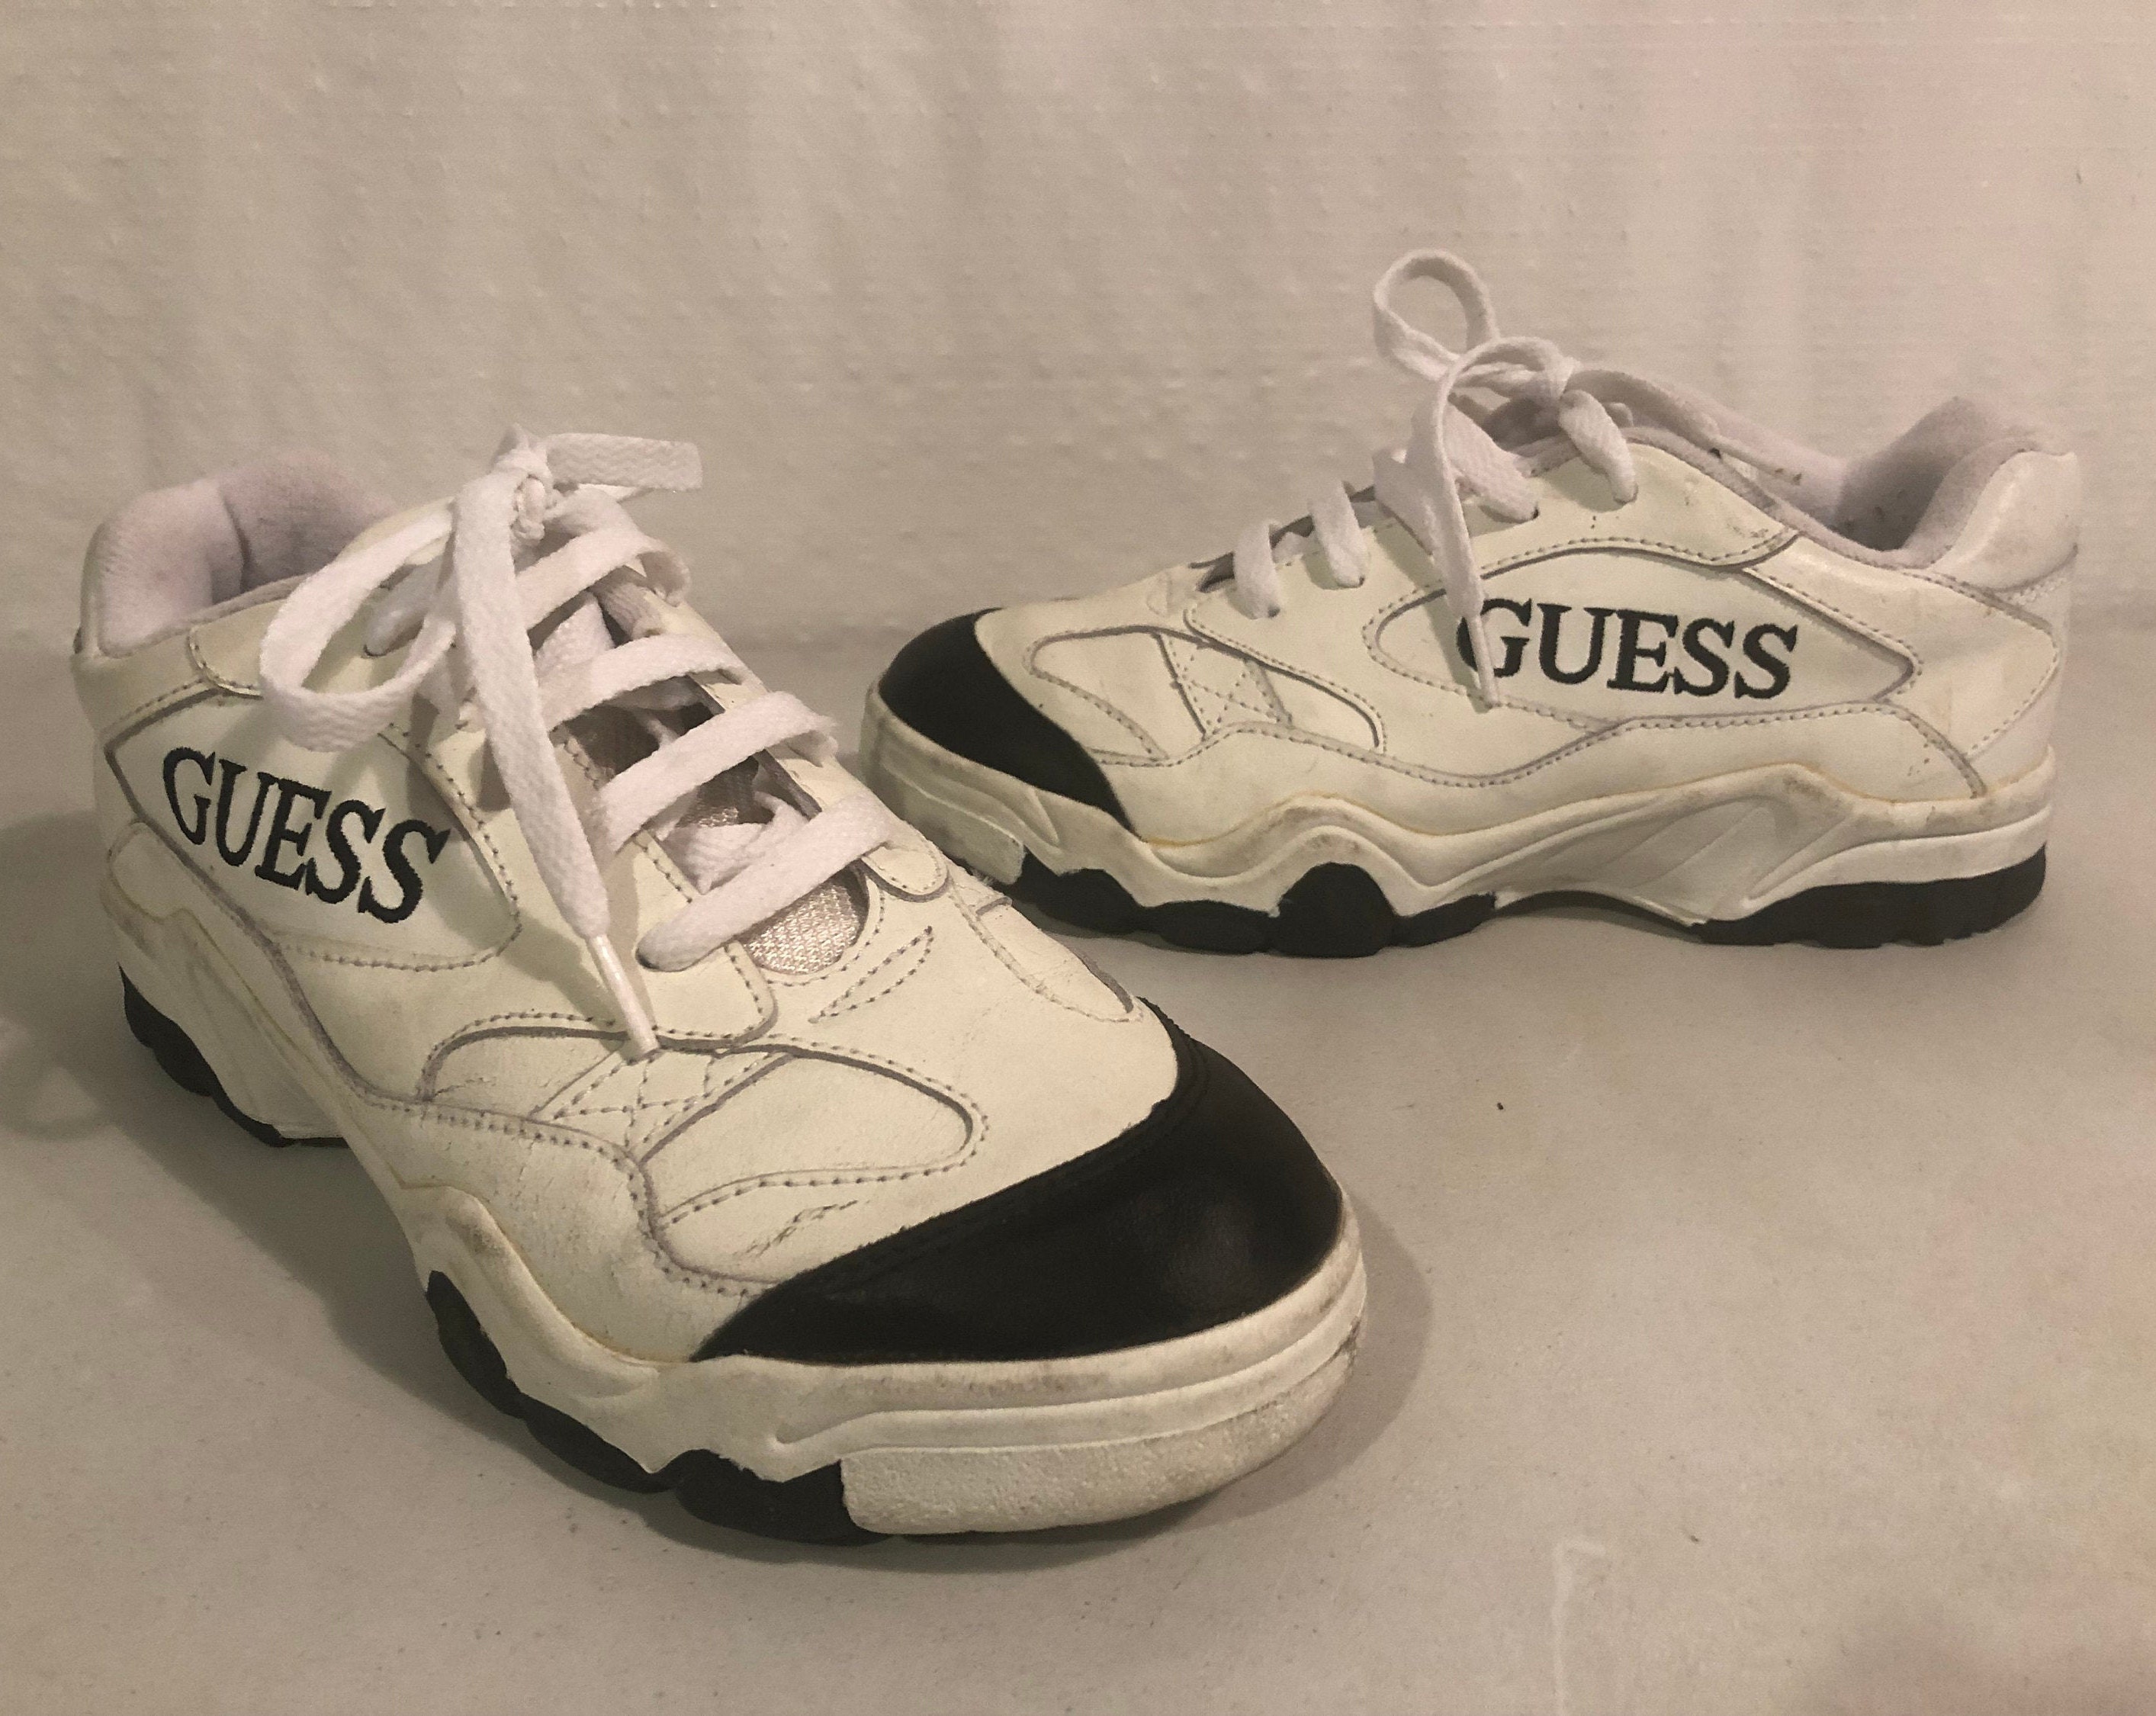 GUESS Sneakers For Women - Buy GUESS Sneakers For Women Online at Best  Price - Shop Online for Footwears in India | Flipkart.com